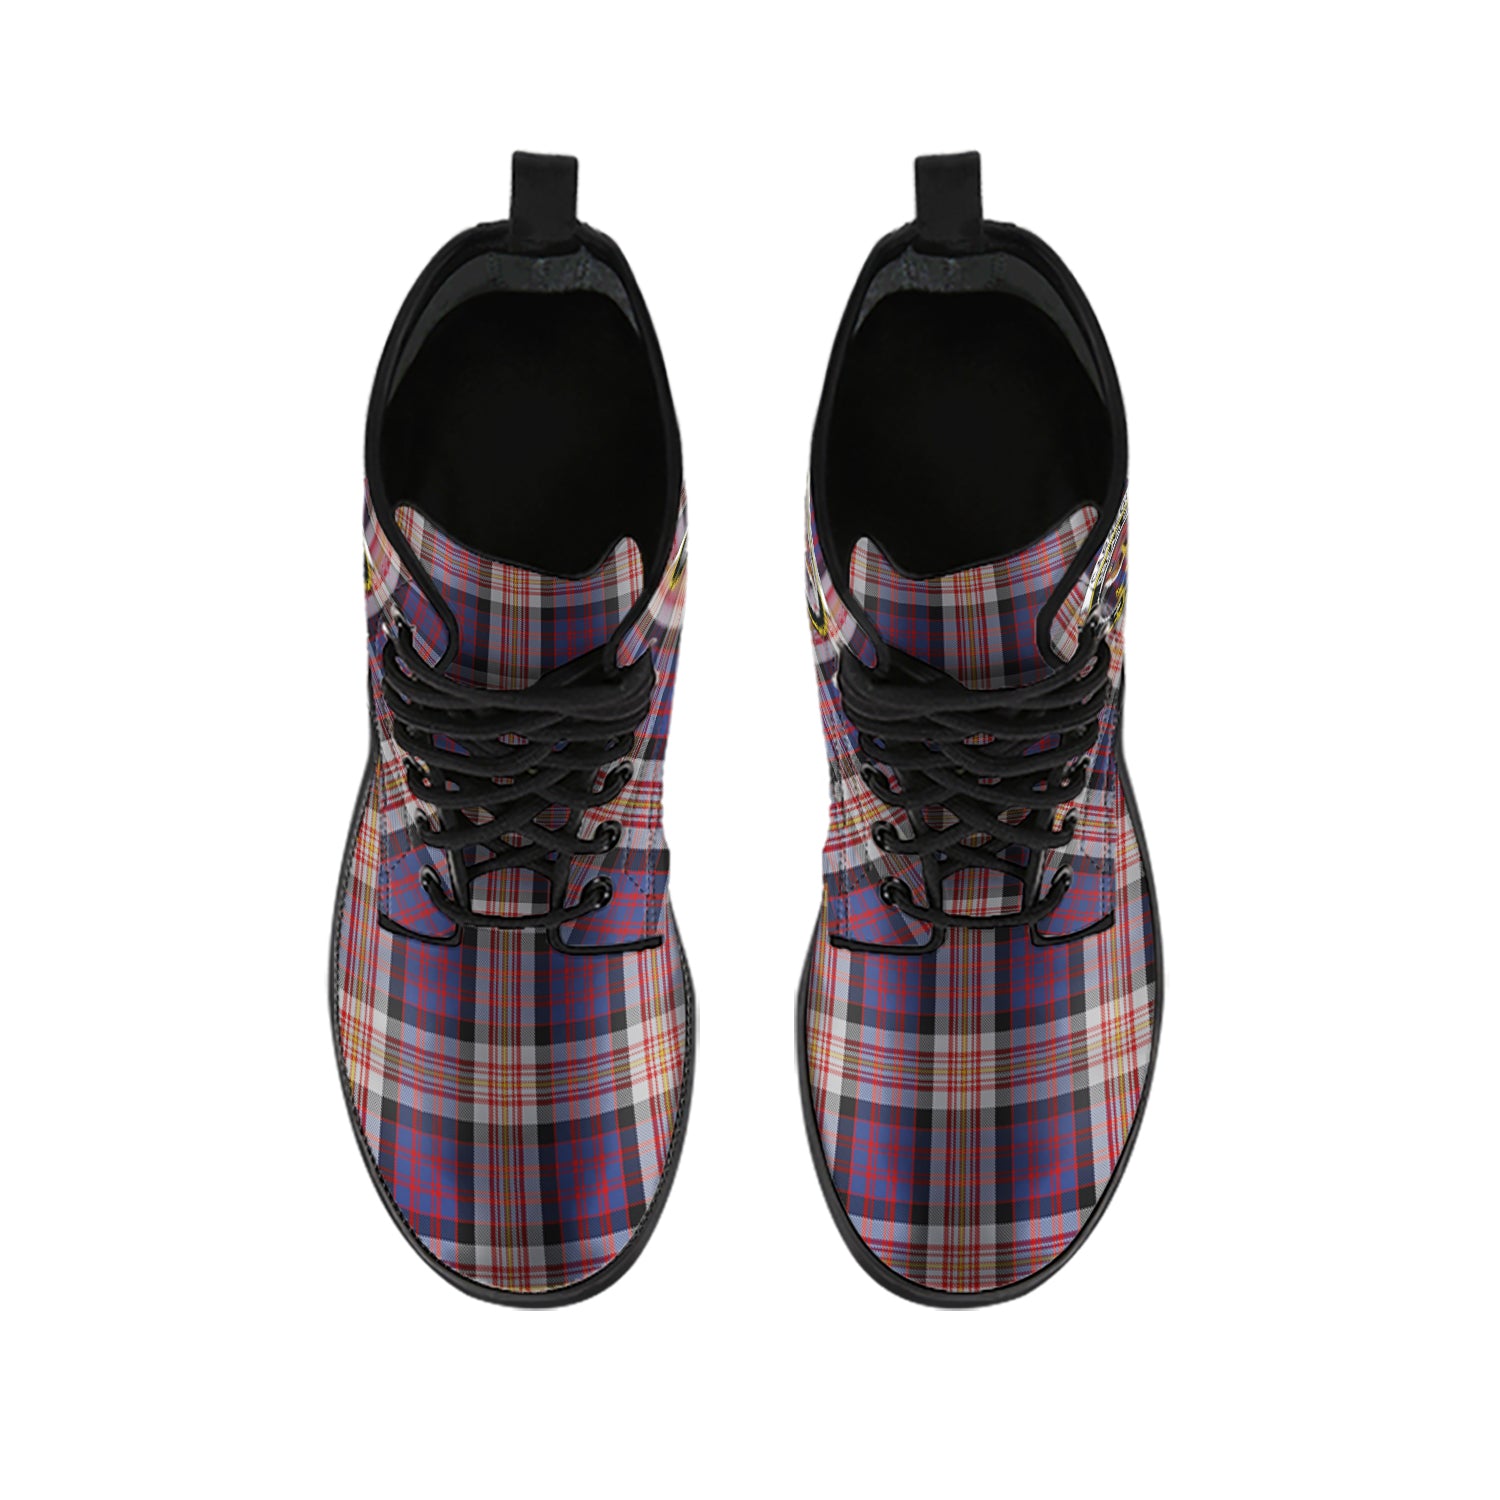 carnegie-tartan-leather-boots-with-family-crest